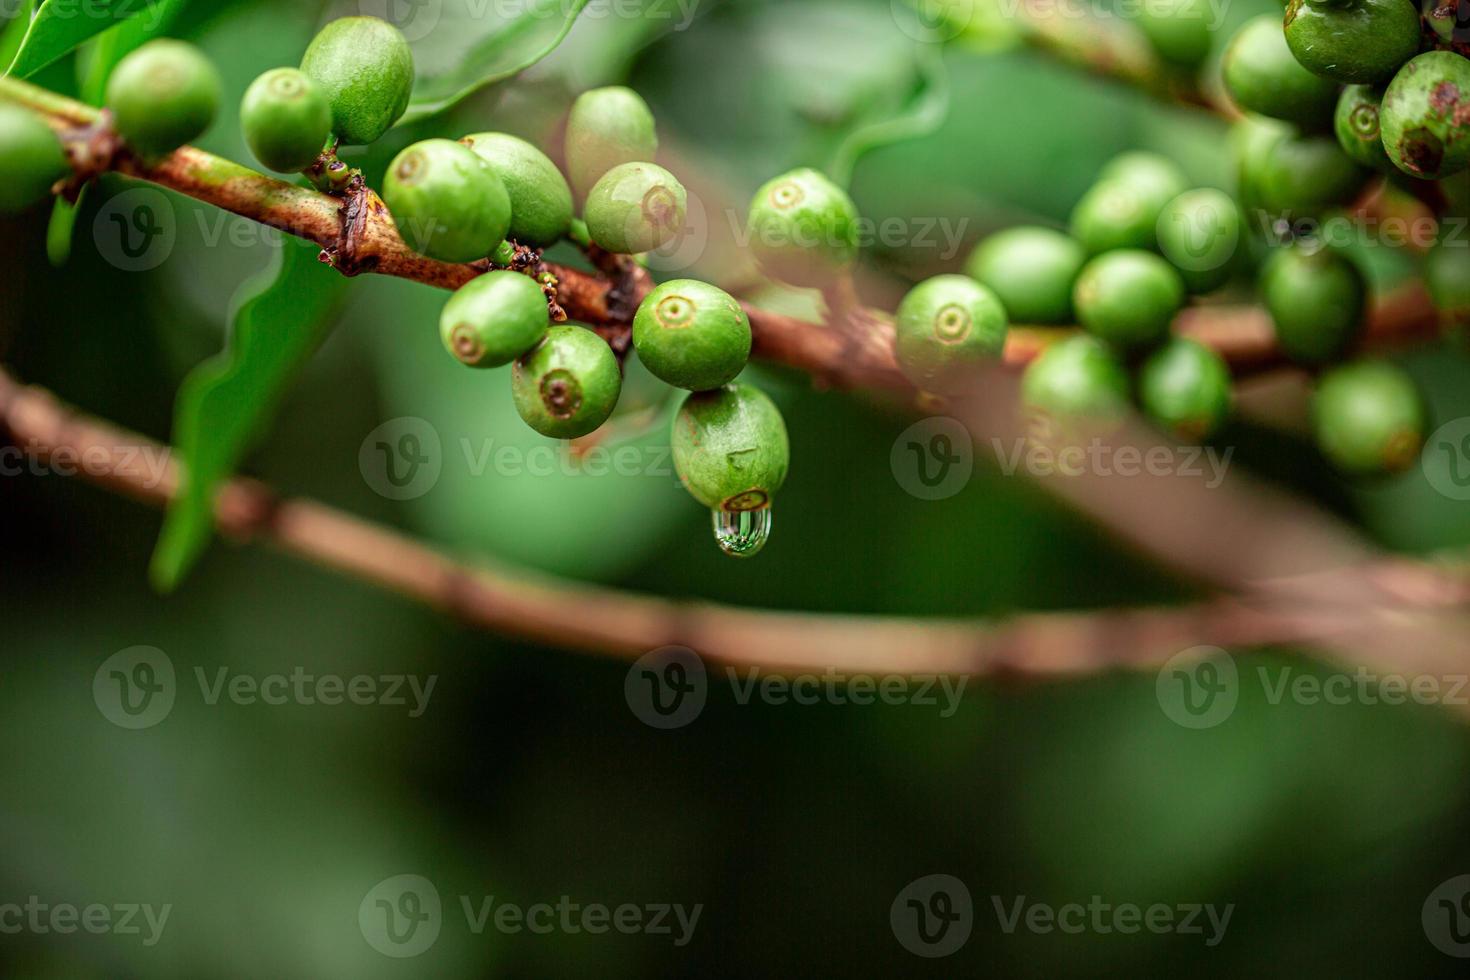 Coffee cherries. Coffee beans on coffee tree, branch of a coffee tree with ripe fruits with dew. Concept Image. photo